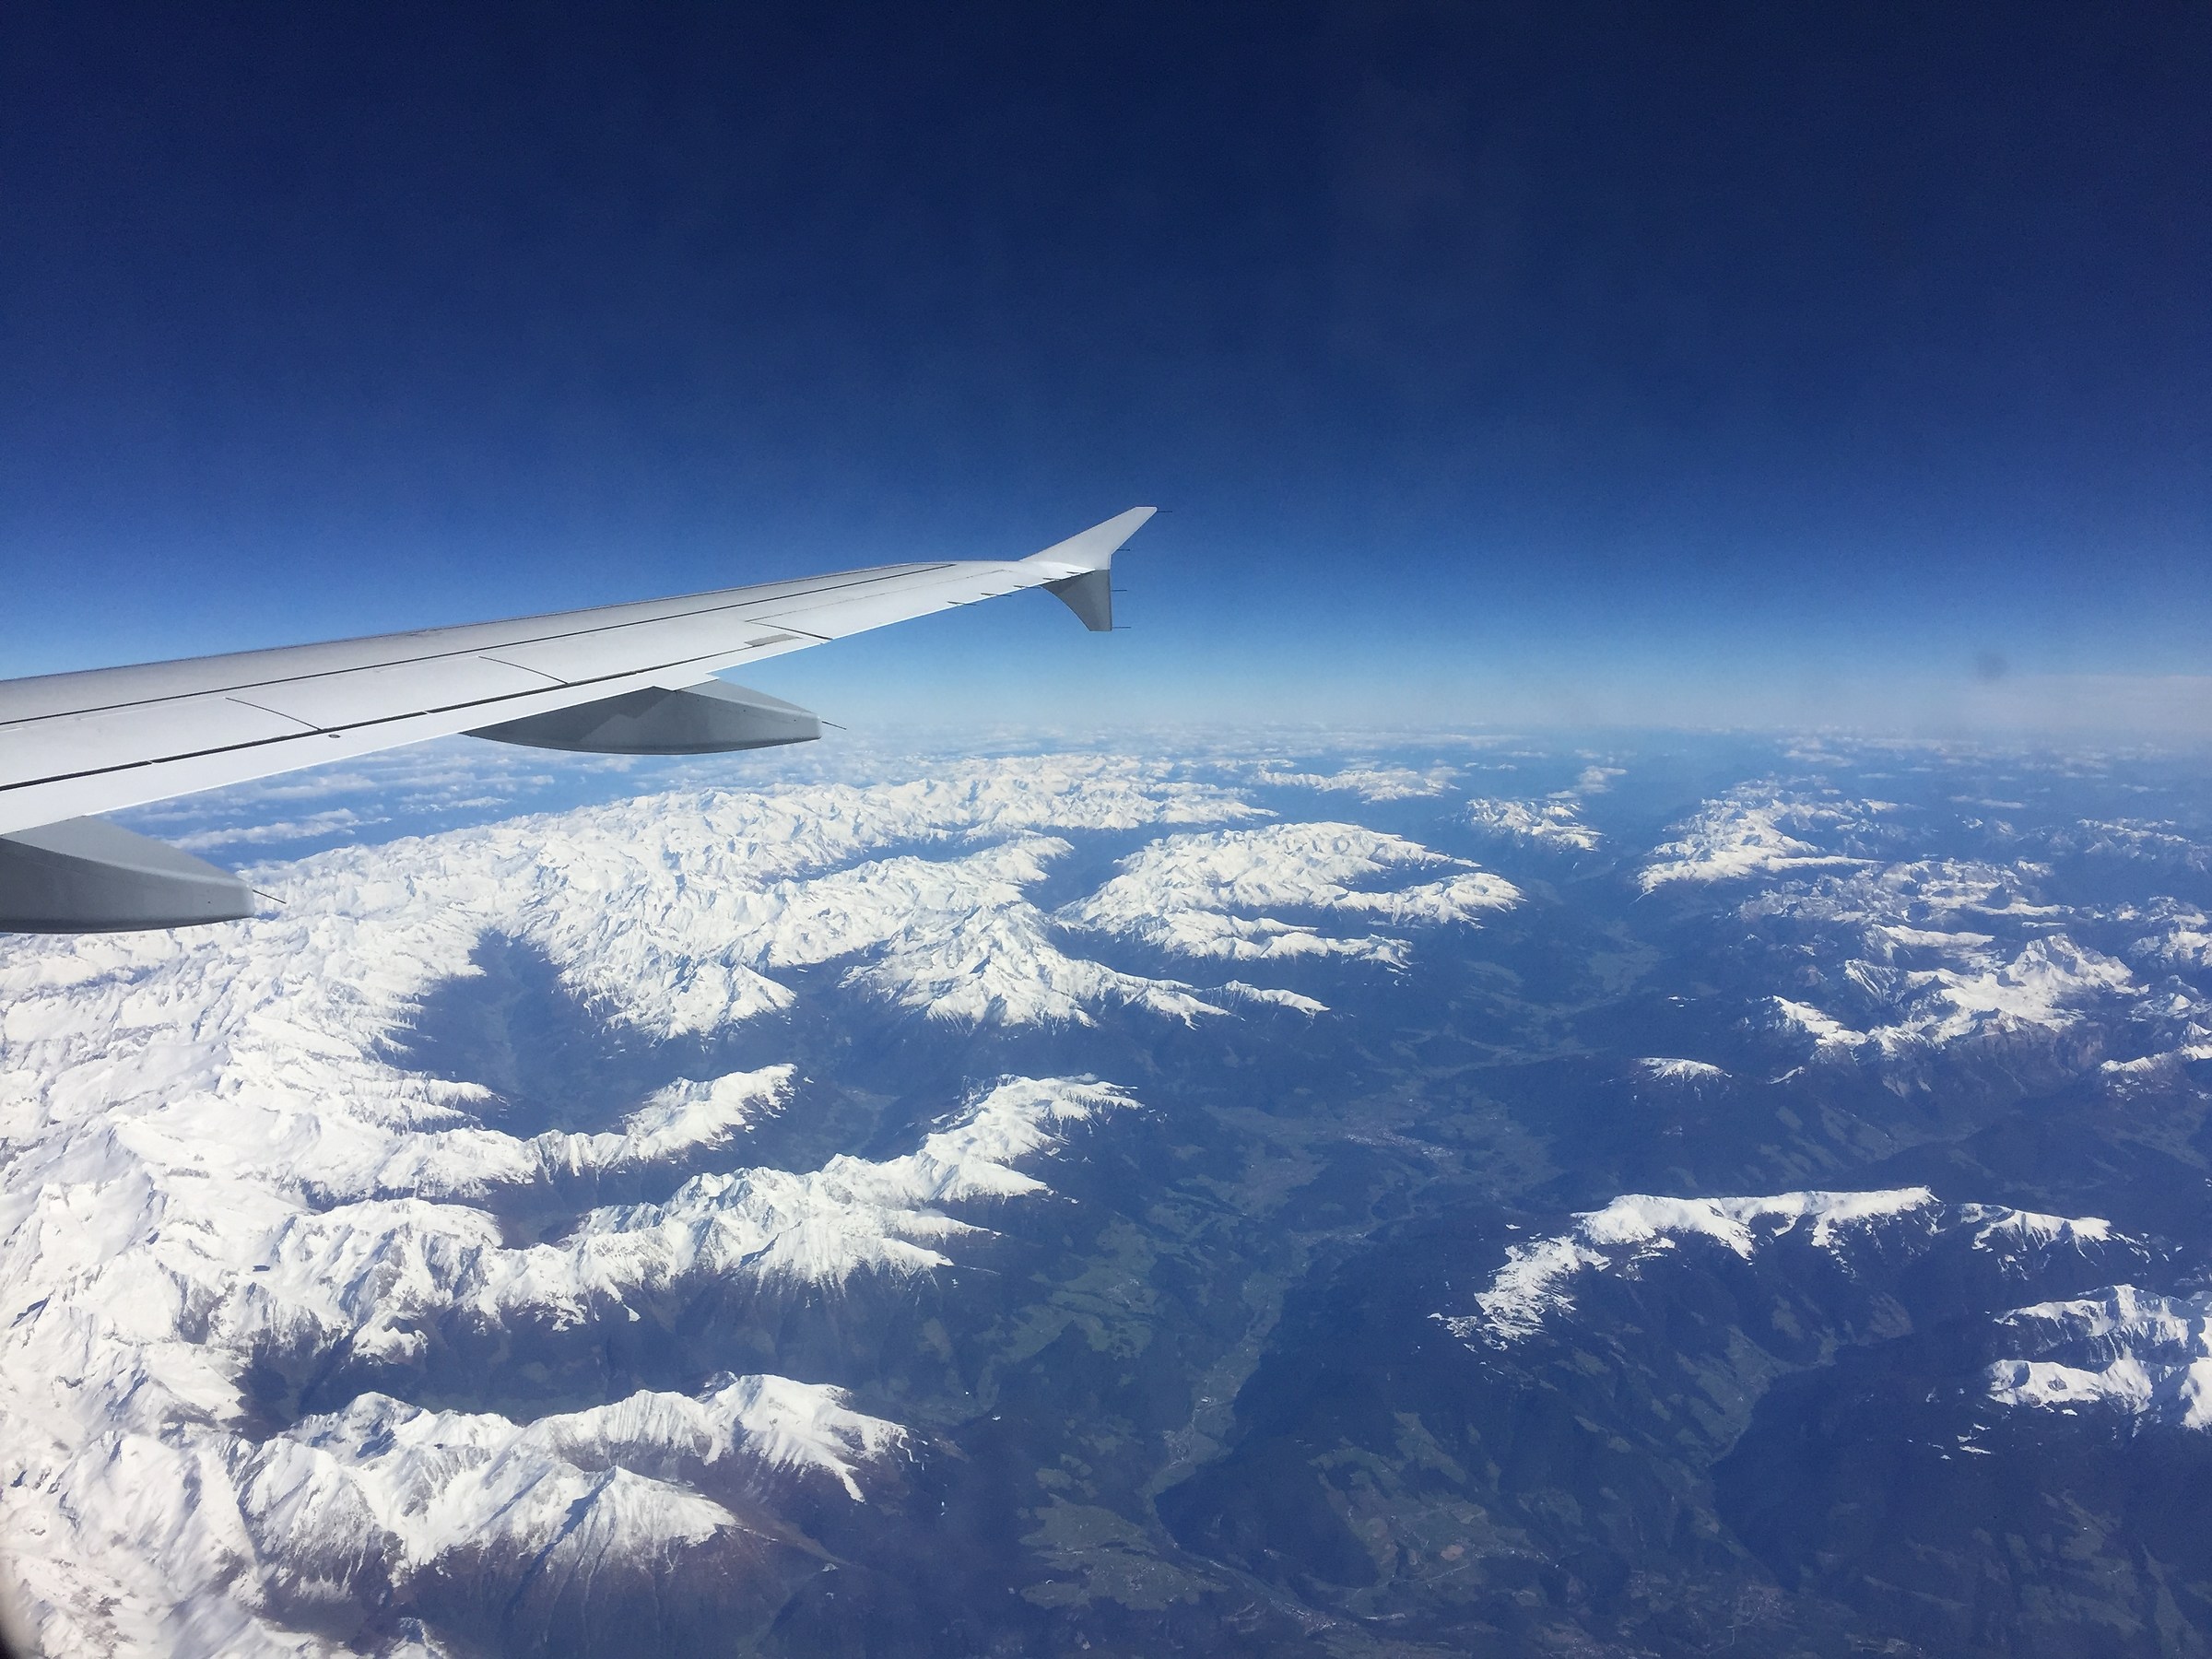 Over the Alps....